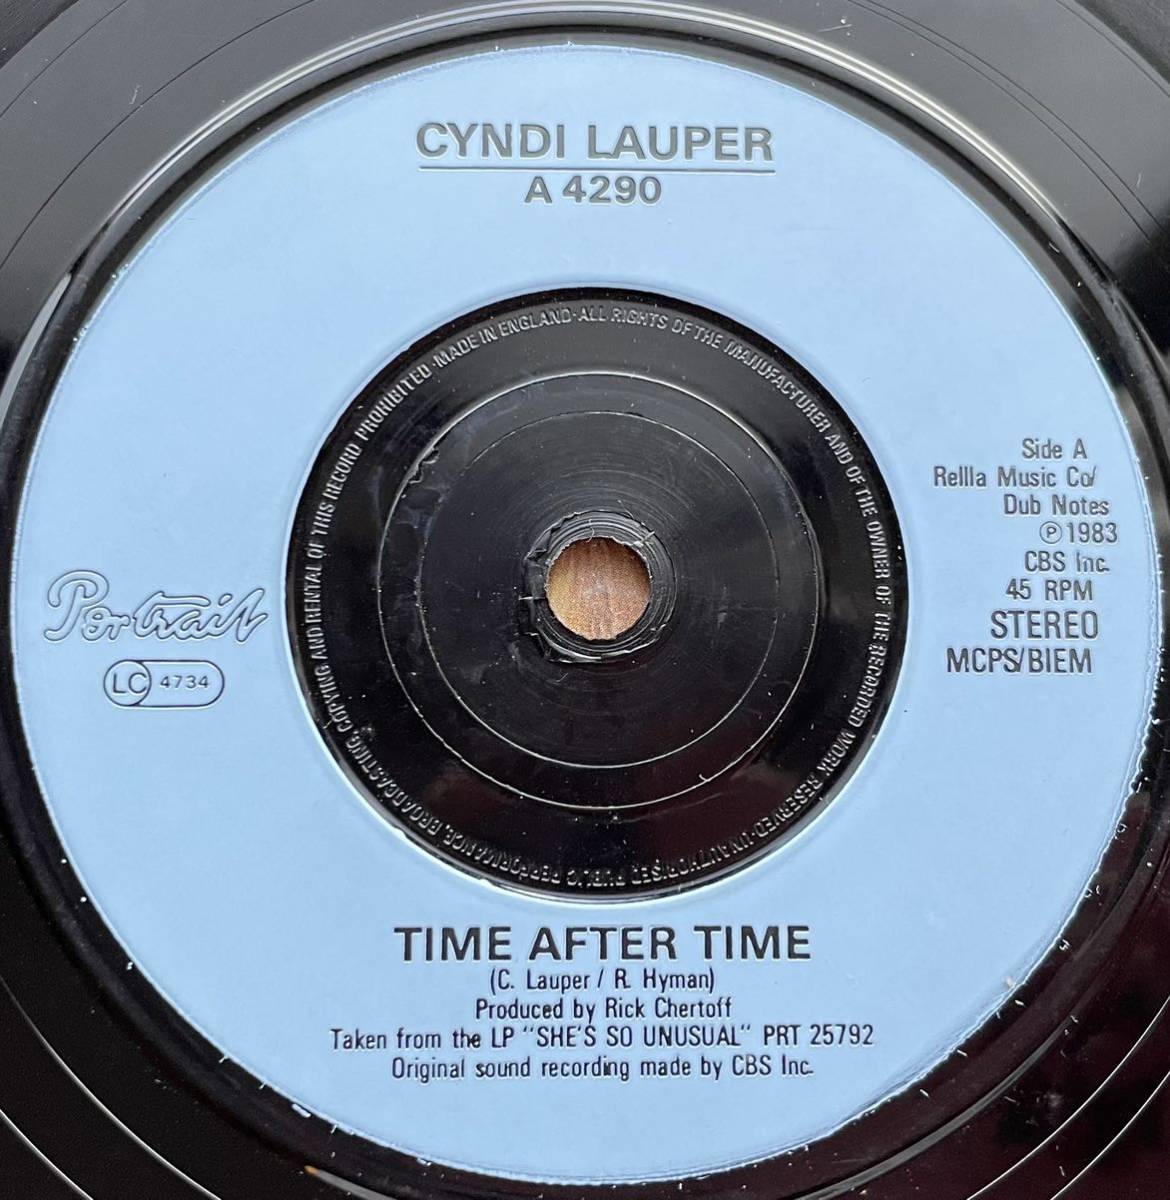 EP盤 Cyndi Lauper Time After Time 7inch盤 その他にもプロモーション盤 レア盤 人気レコード 多数出品。の画像2